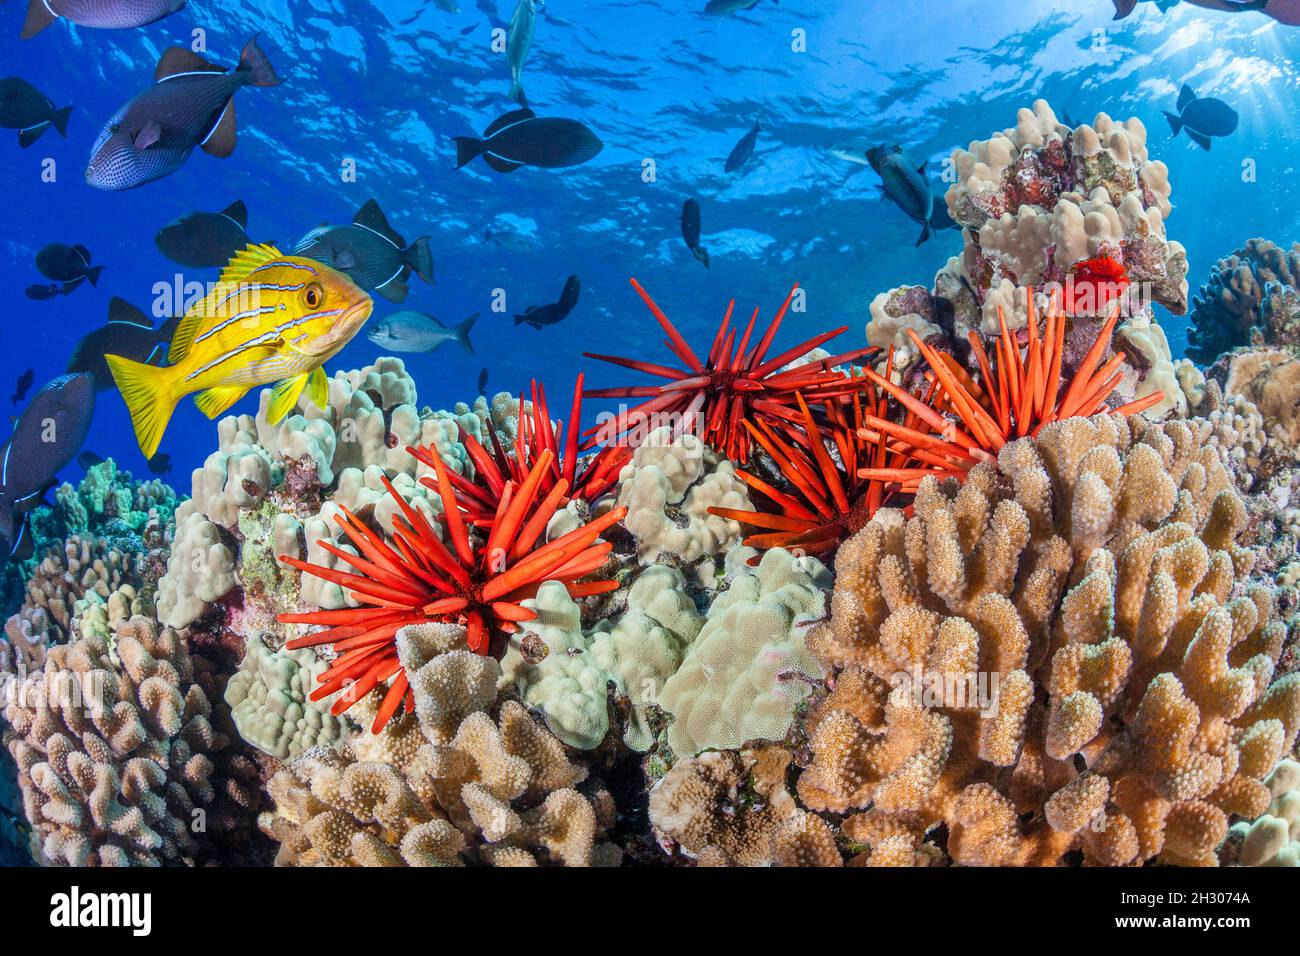 Slate pencil sea urchins, Heterocentrotus mammillatus, color the foreground of this Hawaiian reef scene with black triggerfish, Melichthys niger, and Stock Photo